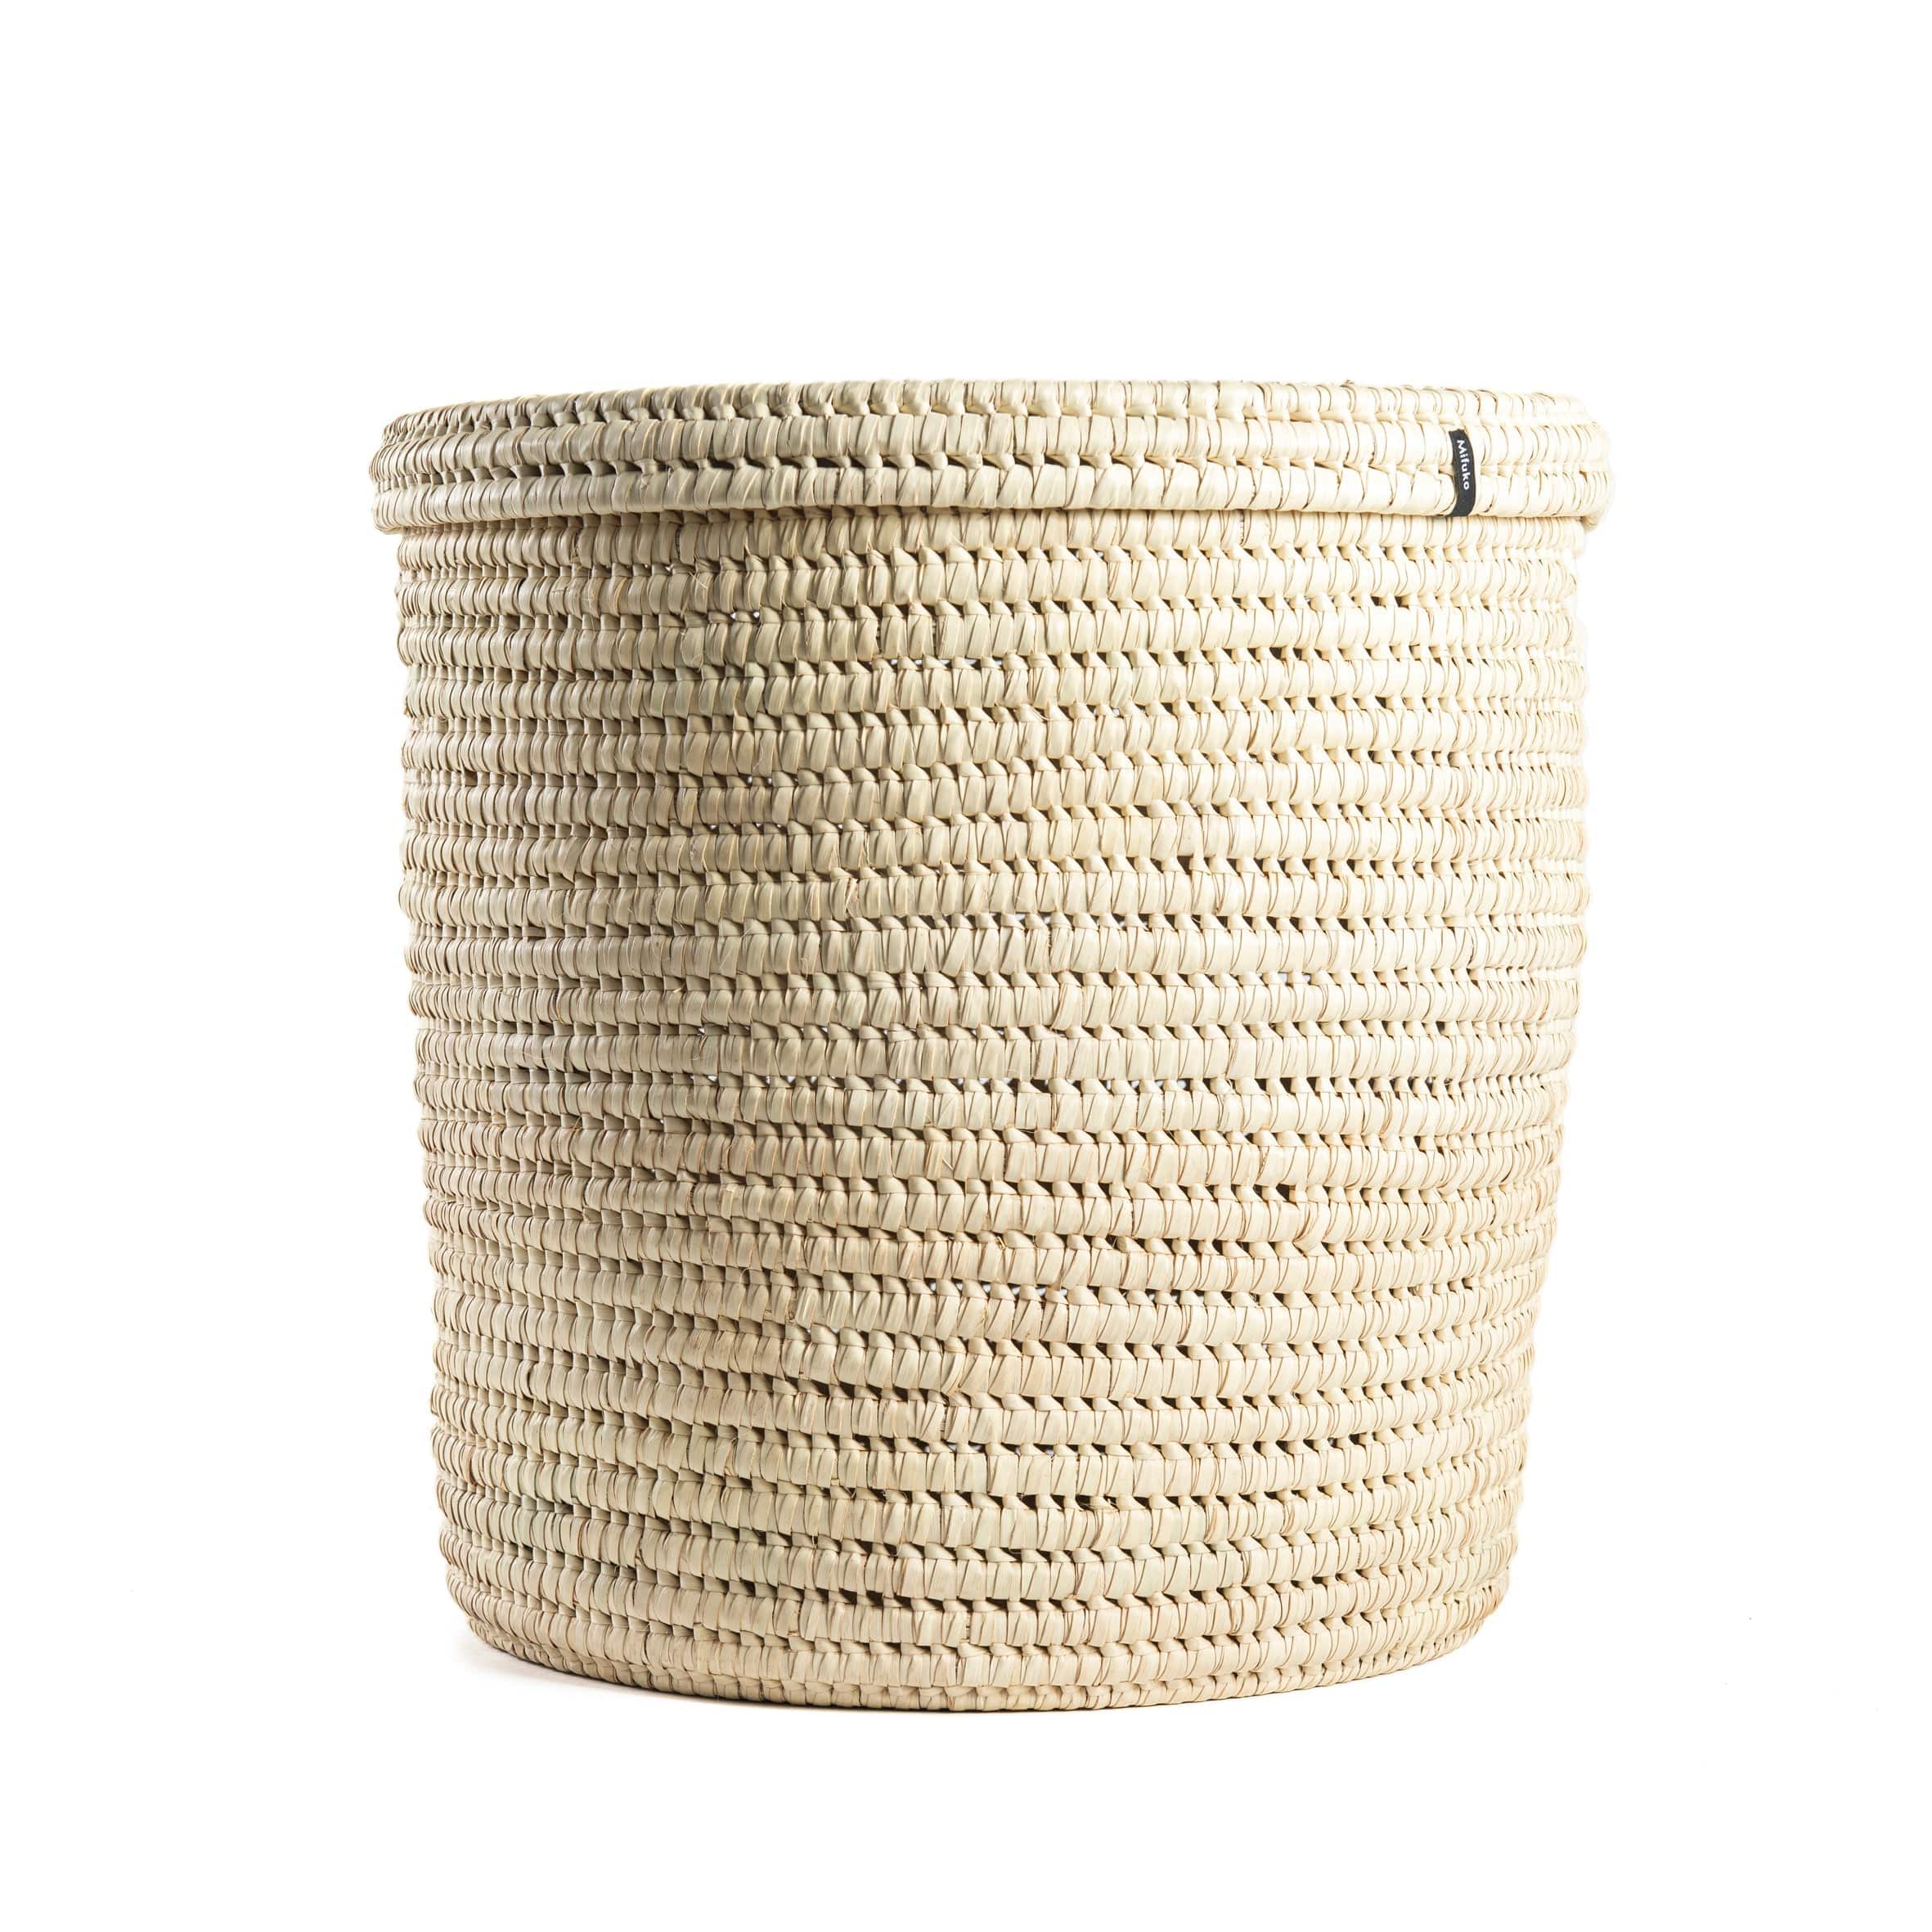 Mifuko Palm tree leaves Basket with lid M Turkana basket | Natural M with a lid